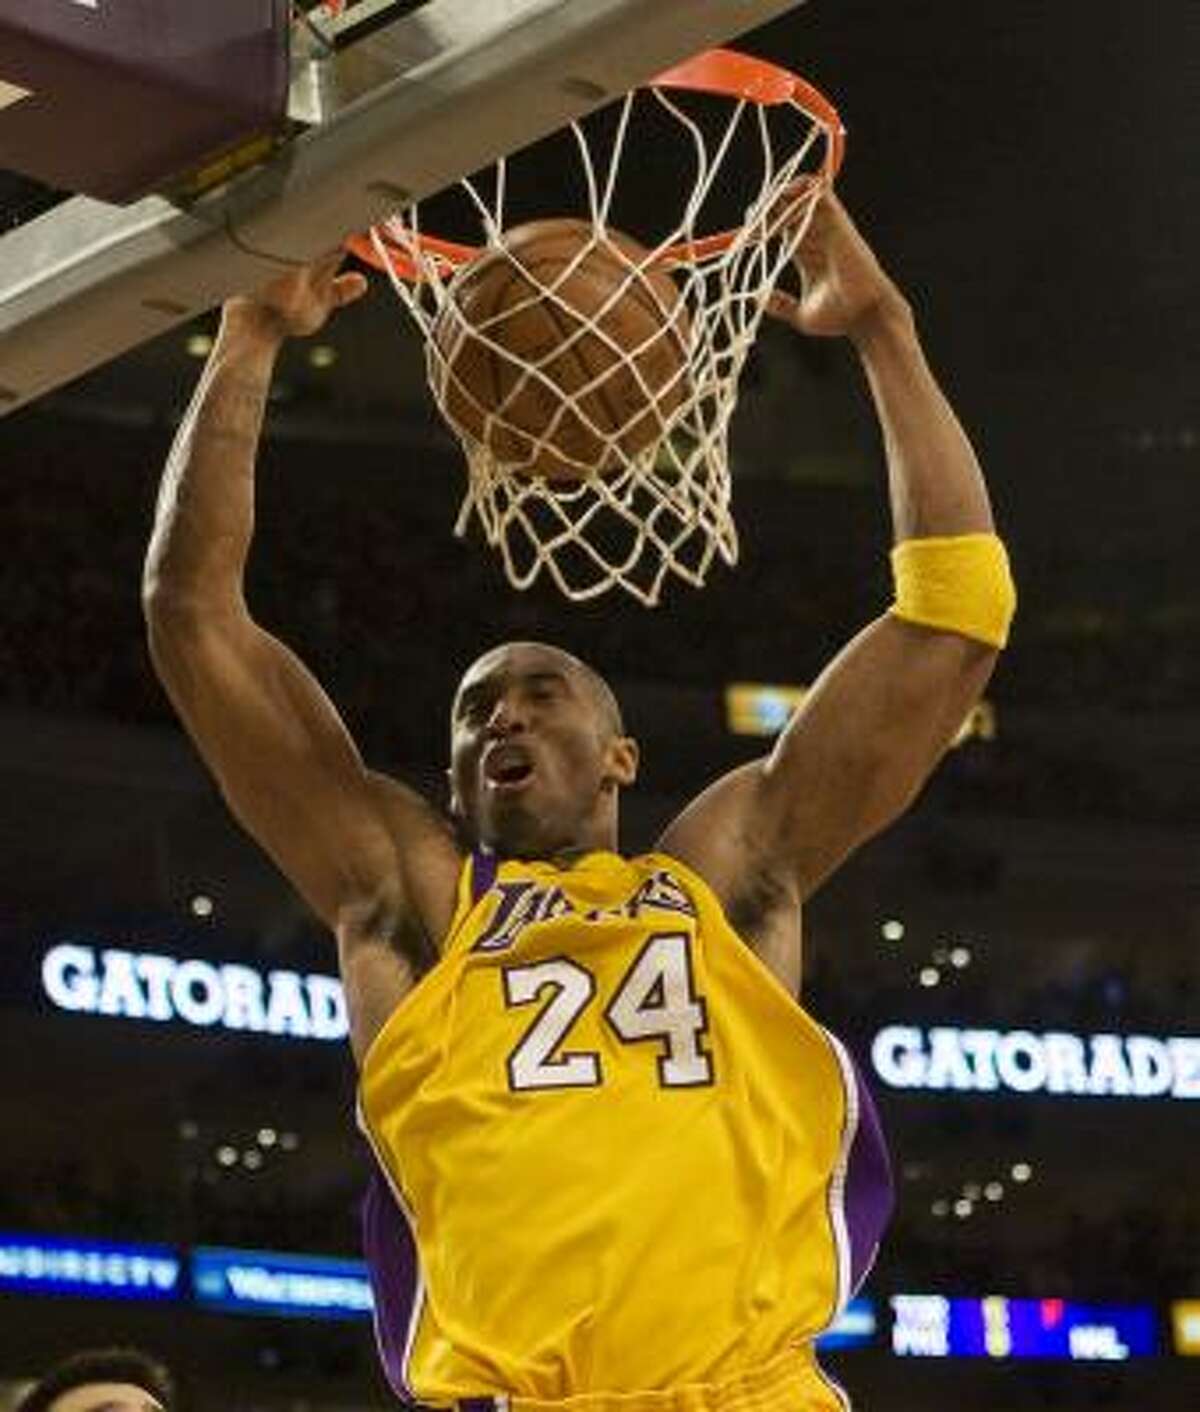 Los Angeles Lakers guard Kobe Bryant (24) dunks during the fourth quarter. Bryant finished with 20 points.